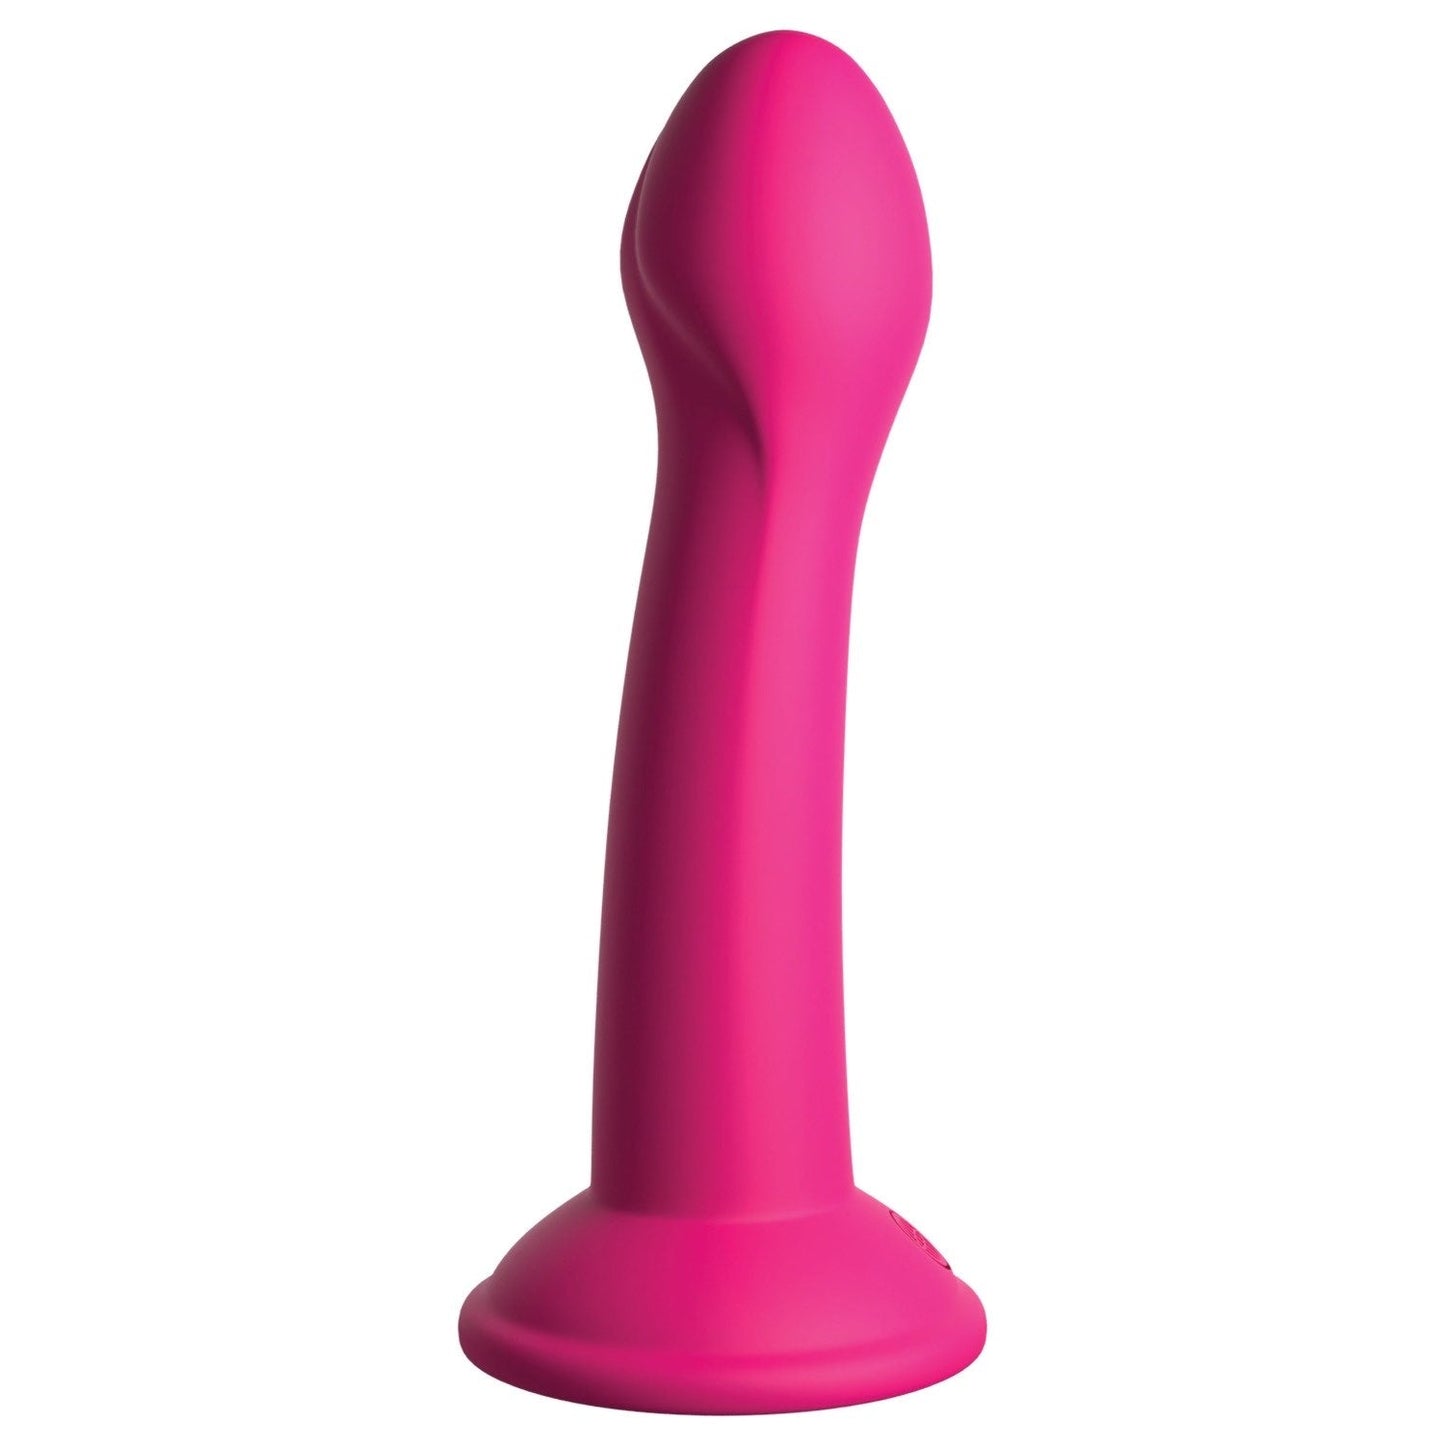 6" Please-Her - Pink 15.2 cm Dong